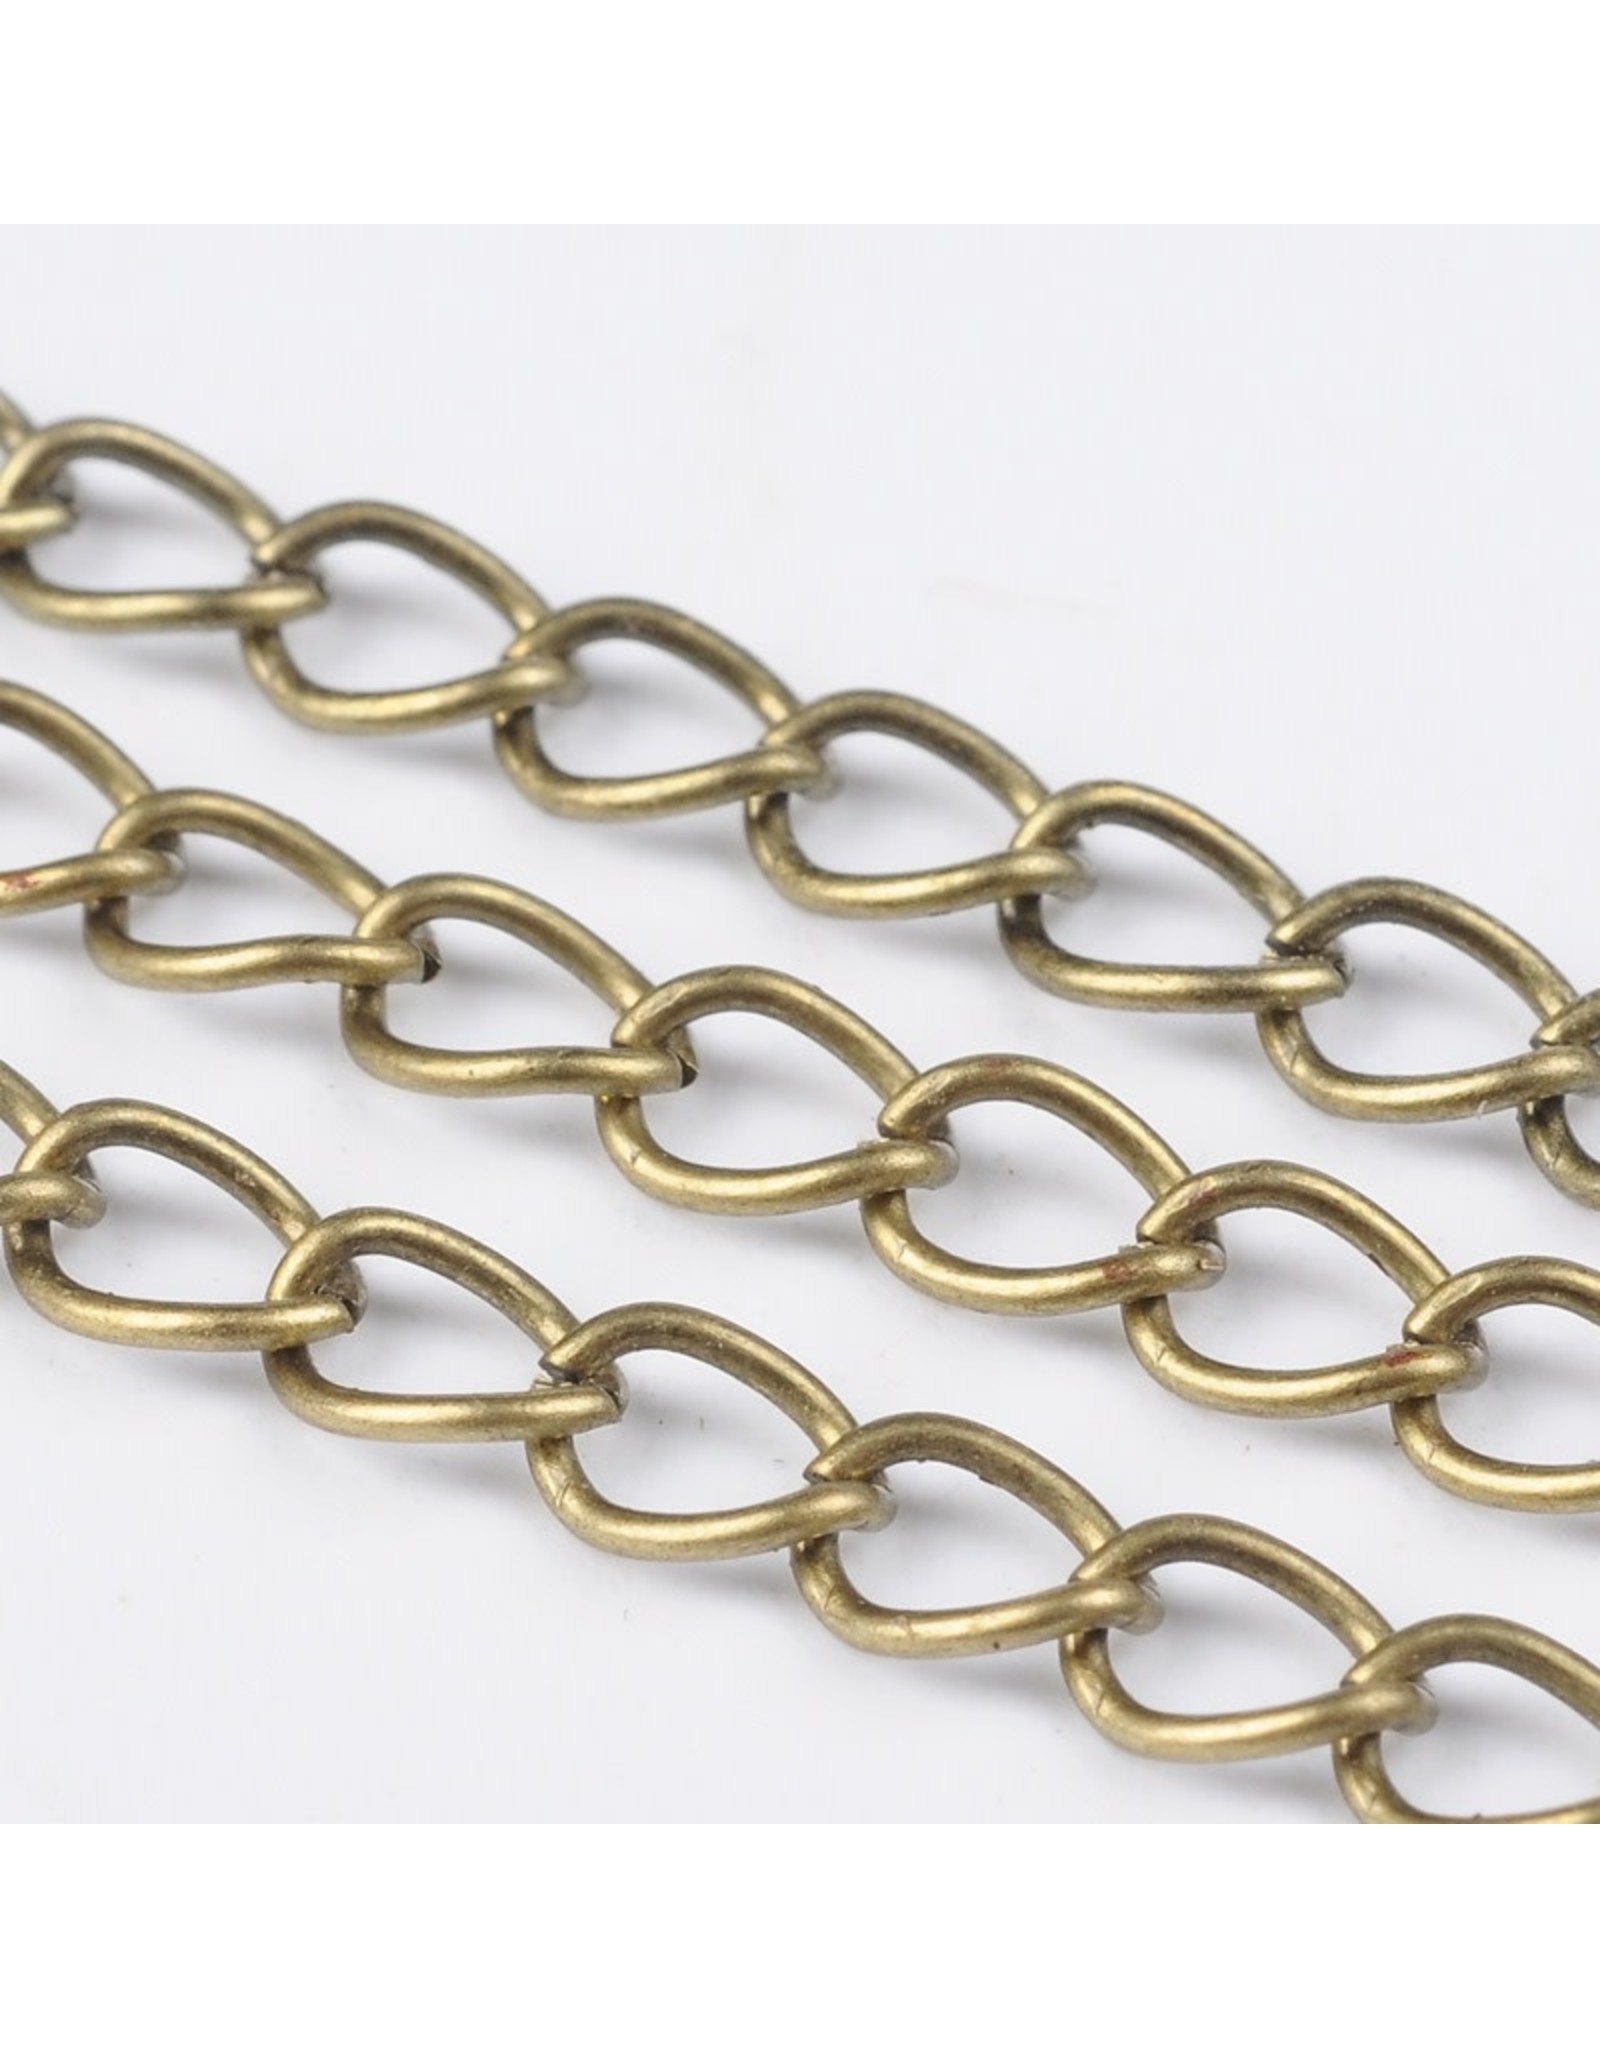 #15 Curb Chain Twisted 6x3mm Antique Brass 16 Feet  NF